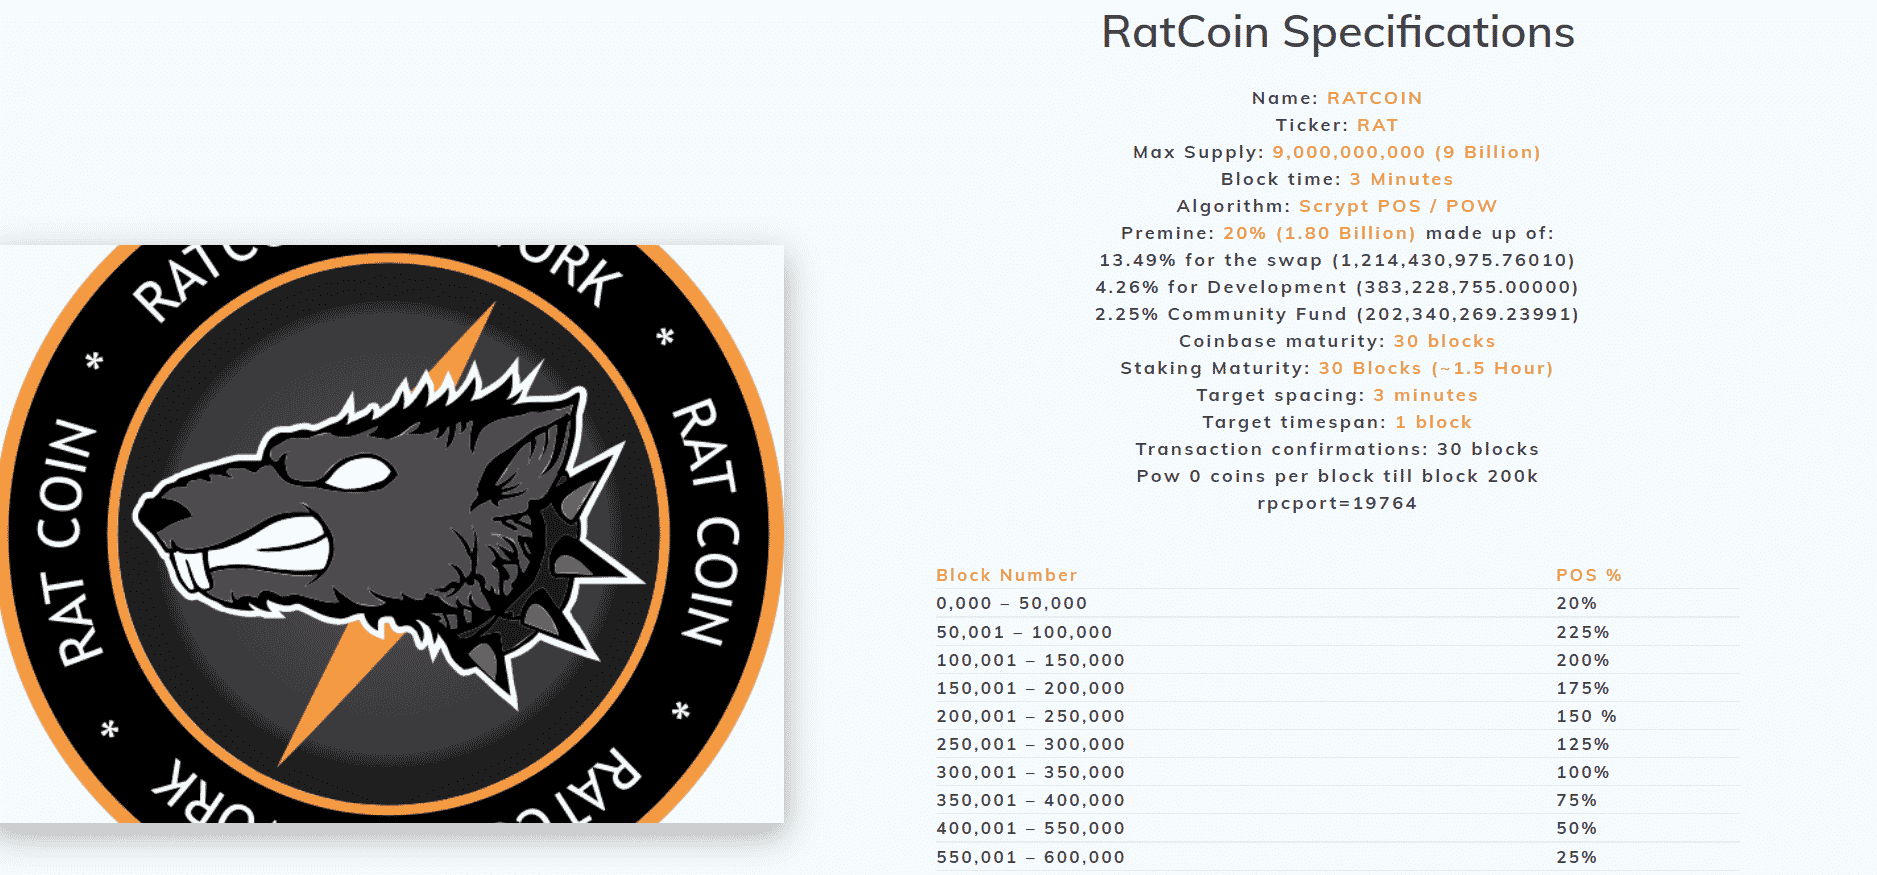 How can you use RatCoin?